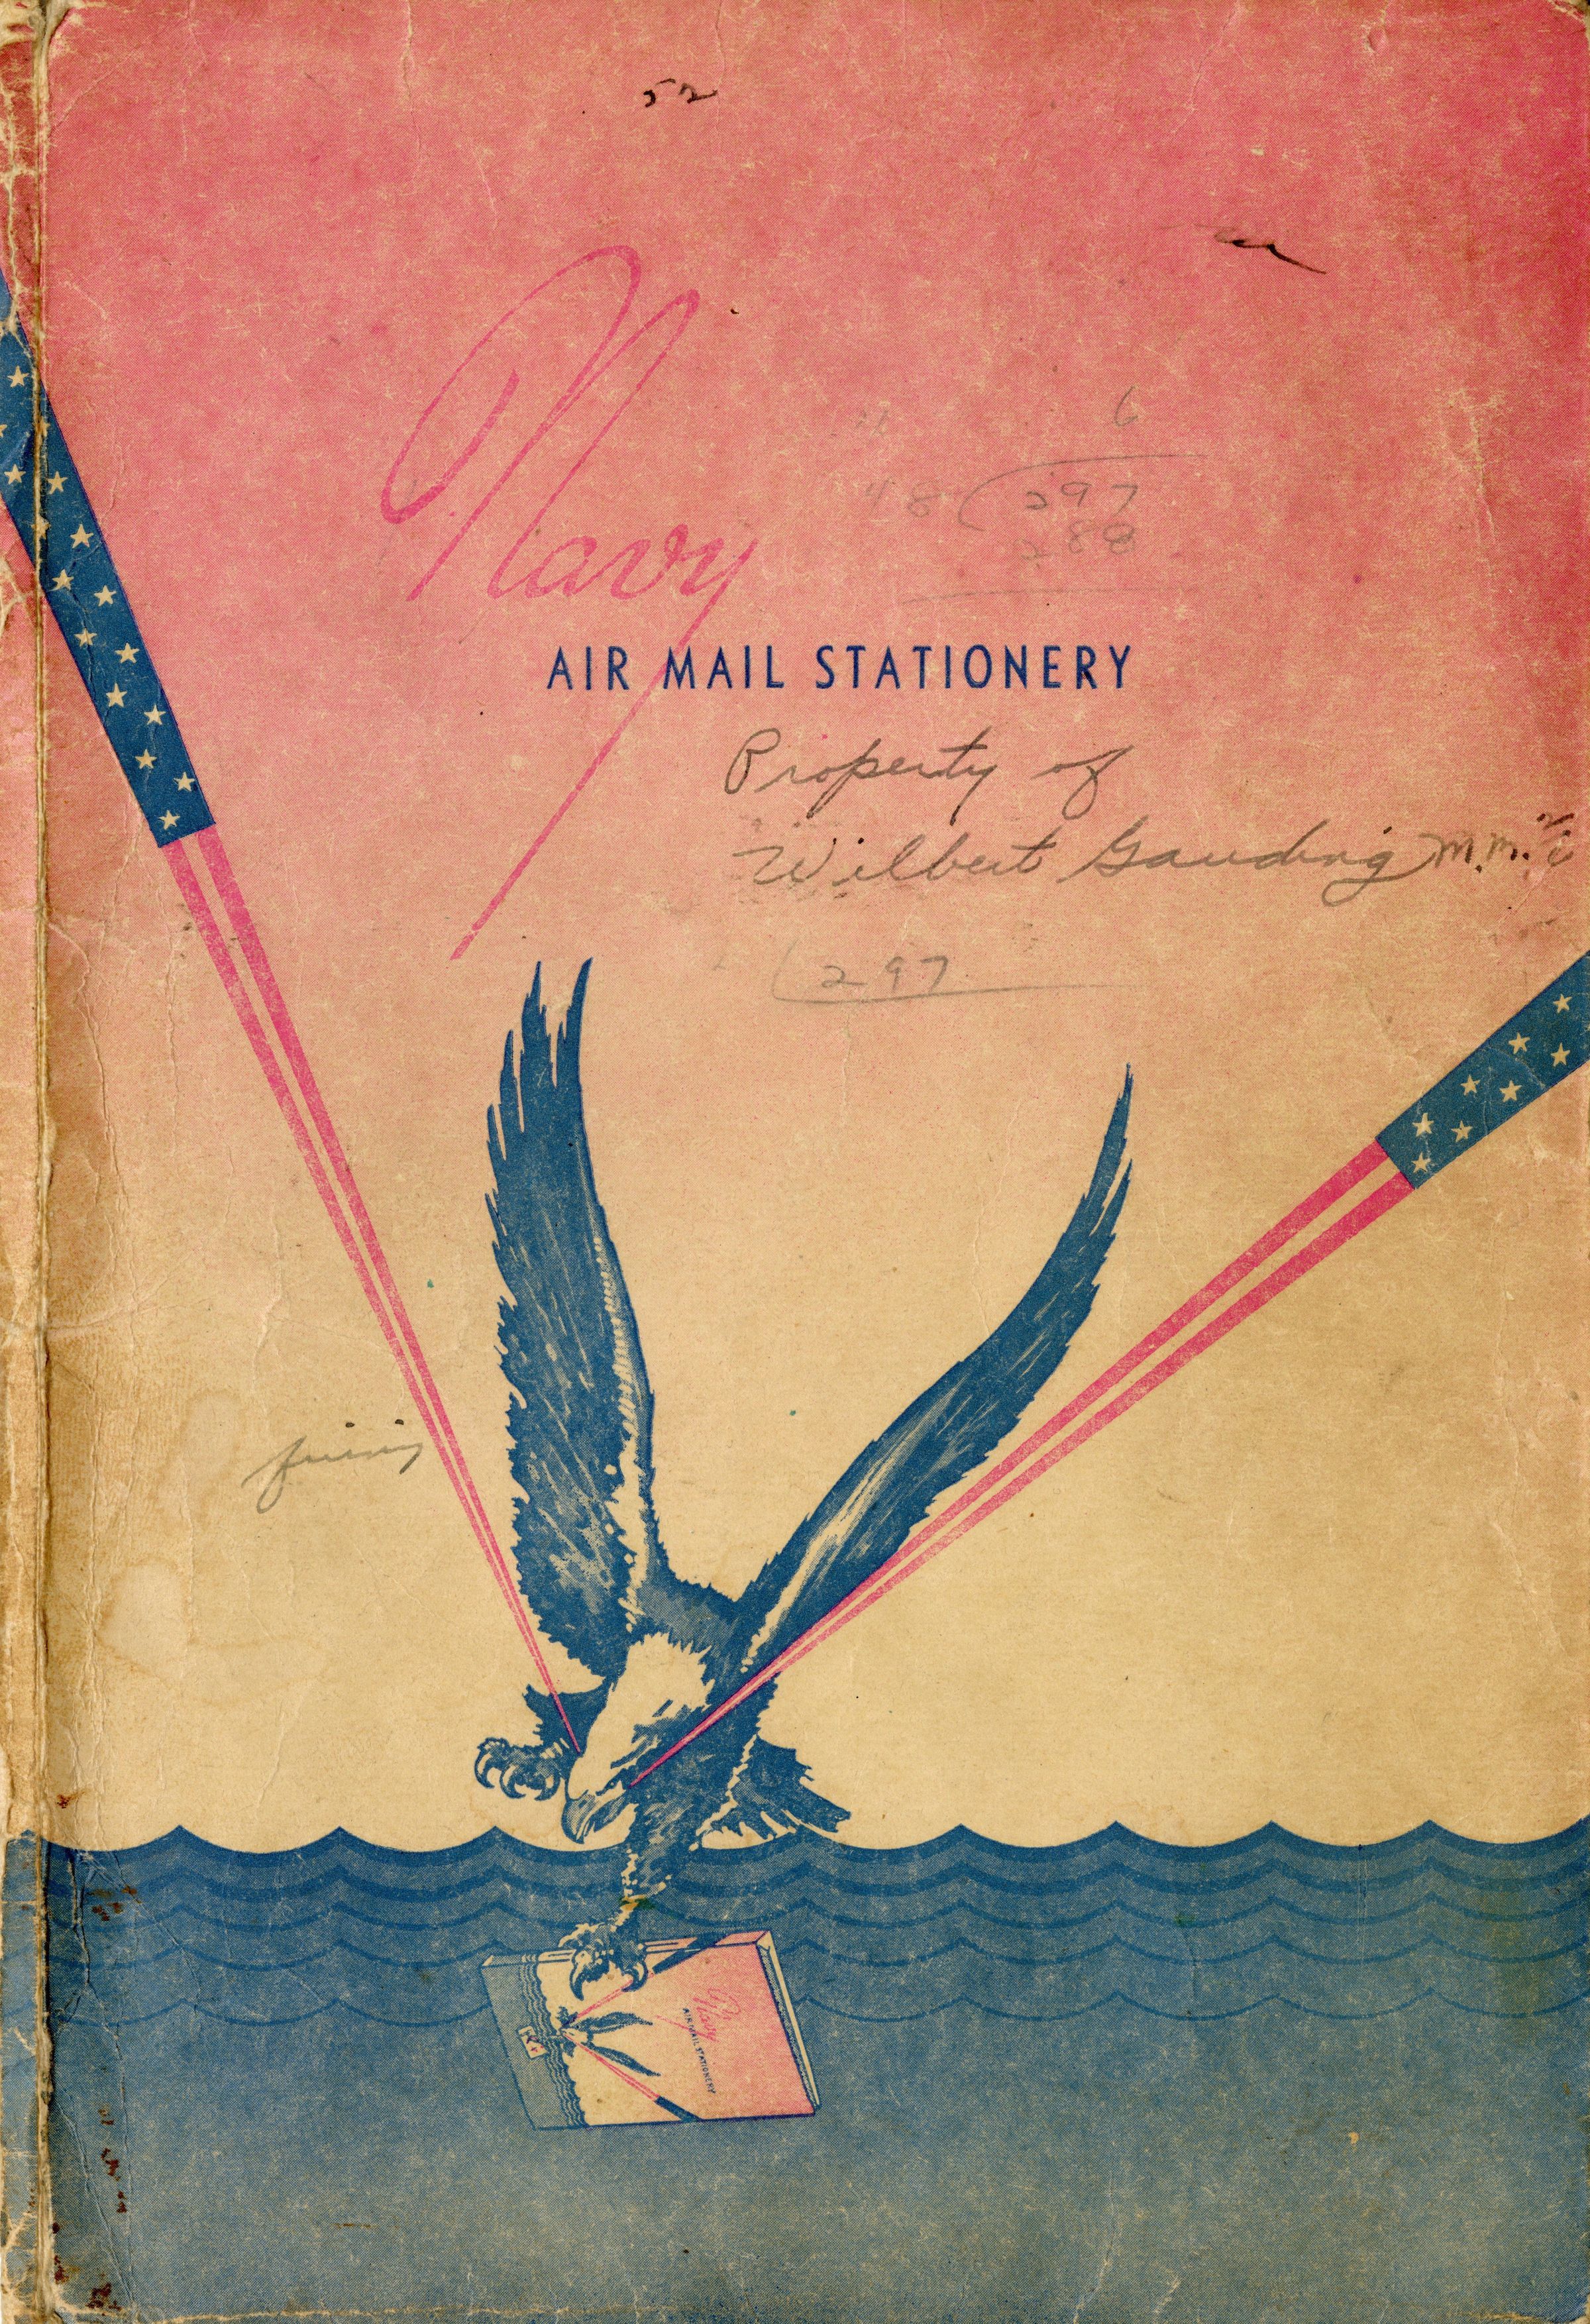 Primary Image of Navy Air Mail Stationery kit with Aloha Hawaii postcard